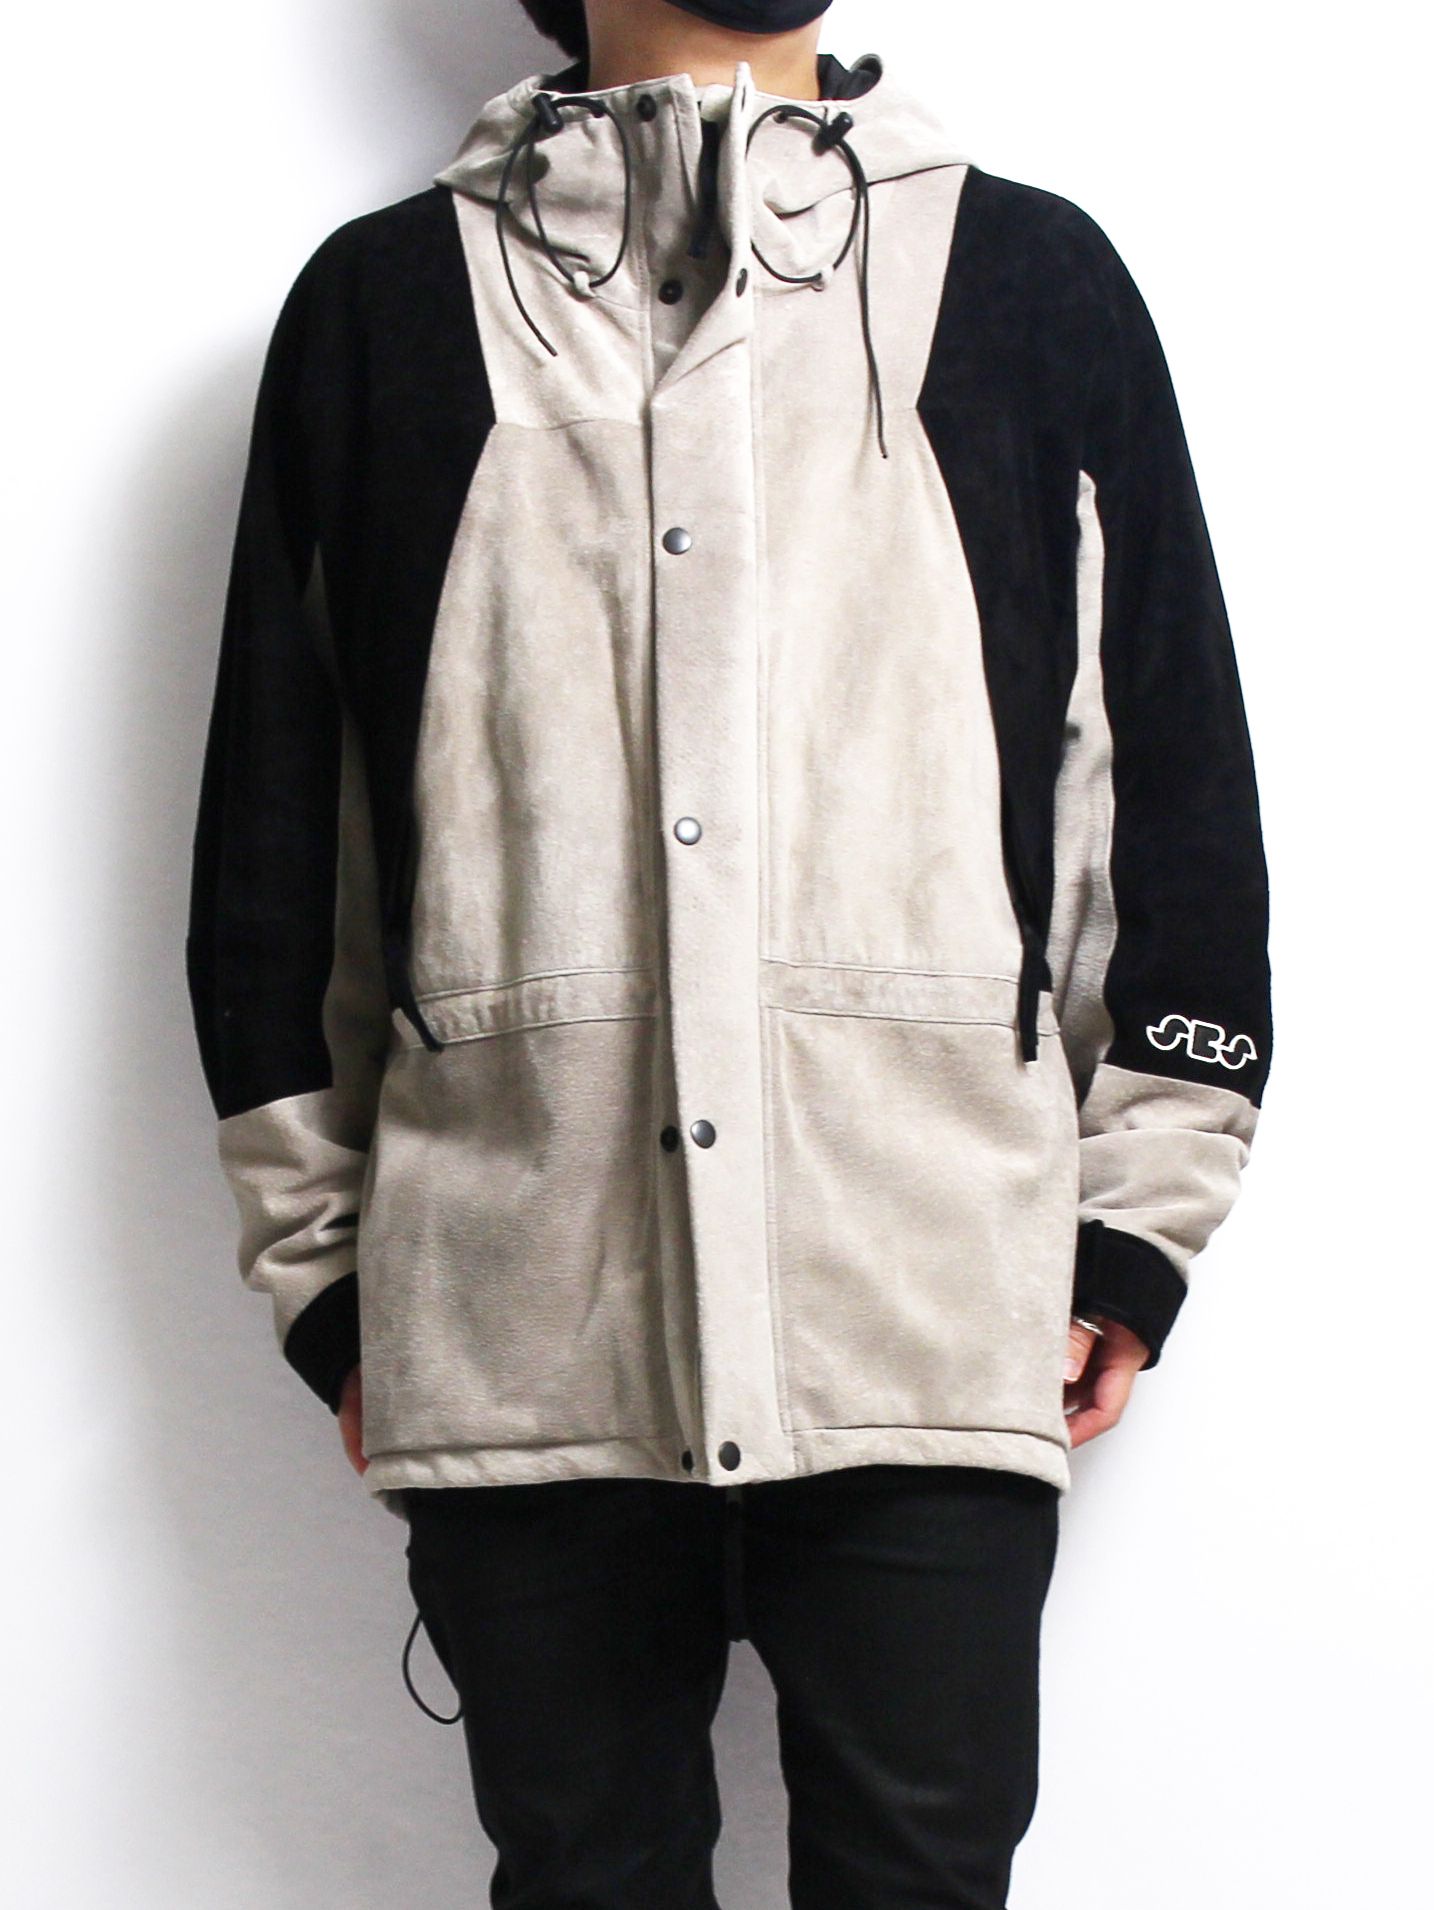 SEVEN BY SEVEN - レザーマウンテンパーカー - LEATHER MOUNTAIN PARKA -GREY | ADDICT WEB  SHOP